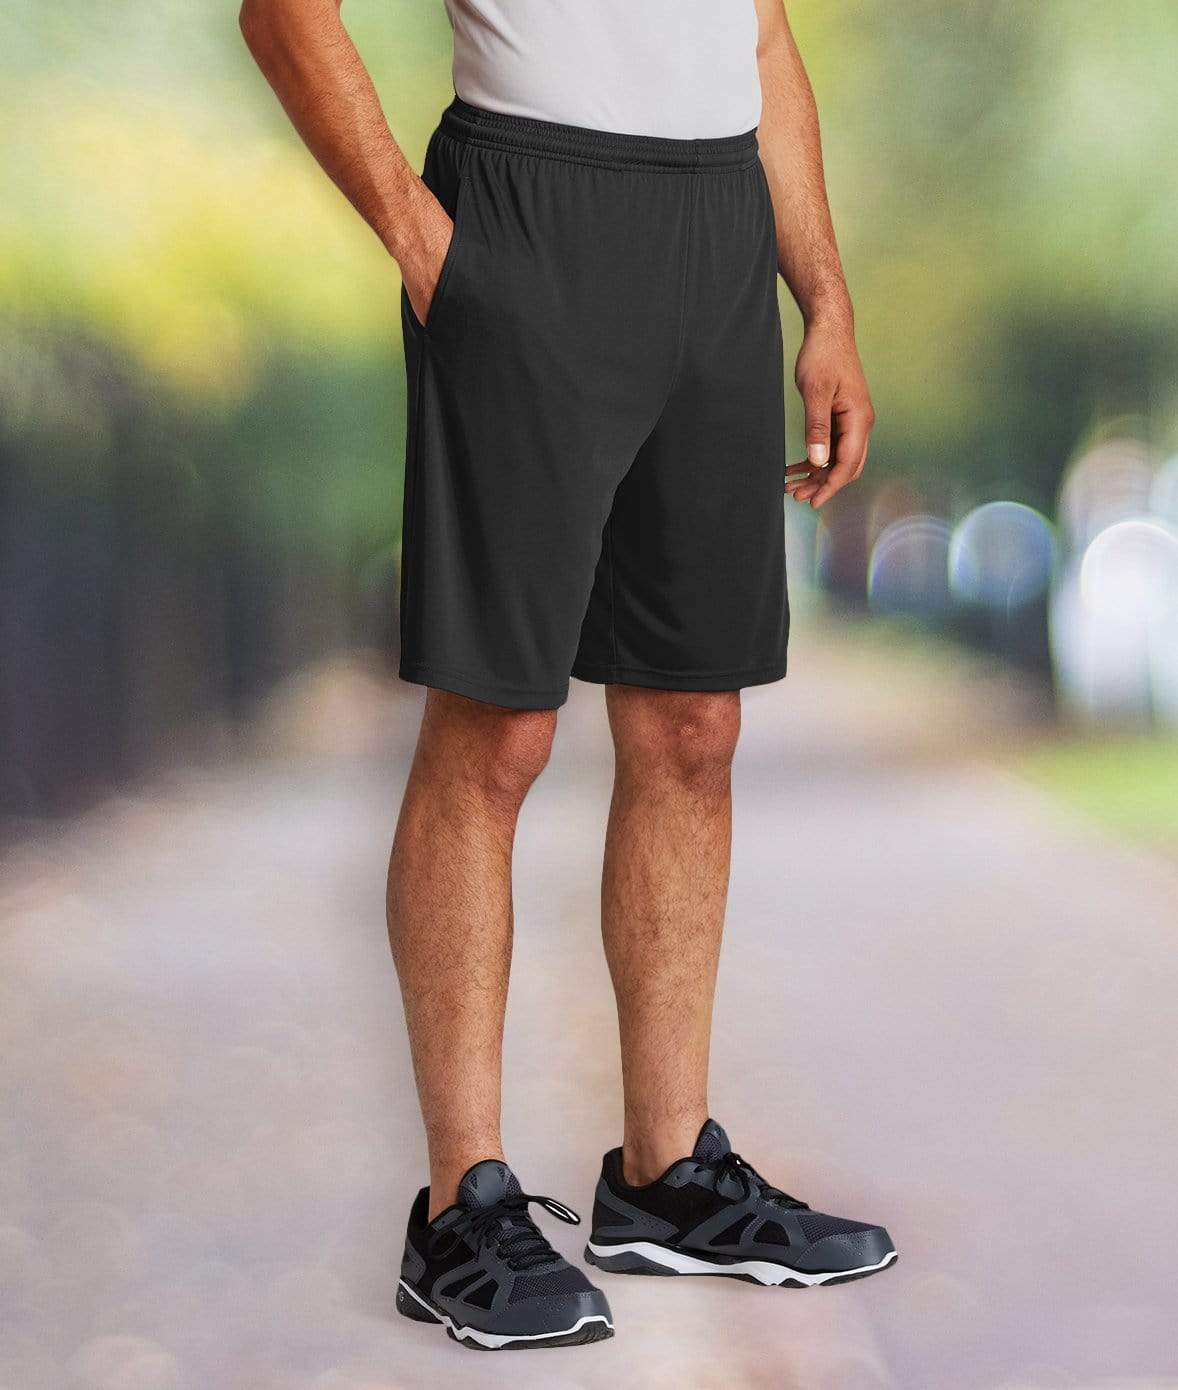 Nayked Apparel Men Men's Ridiculously Soft Pocketed Performance Shorts